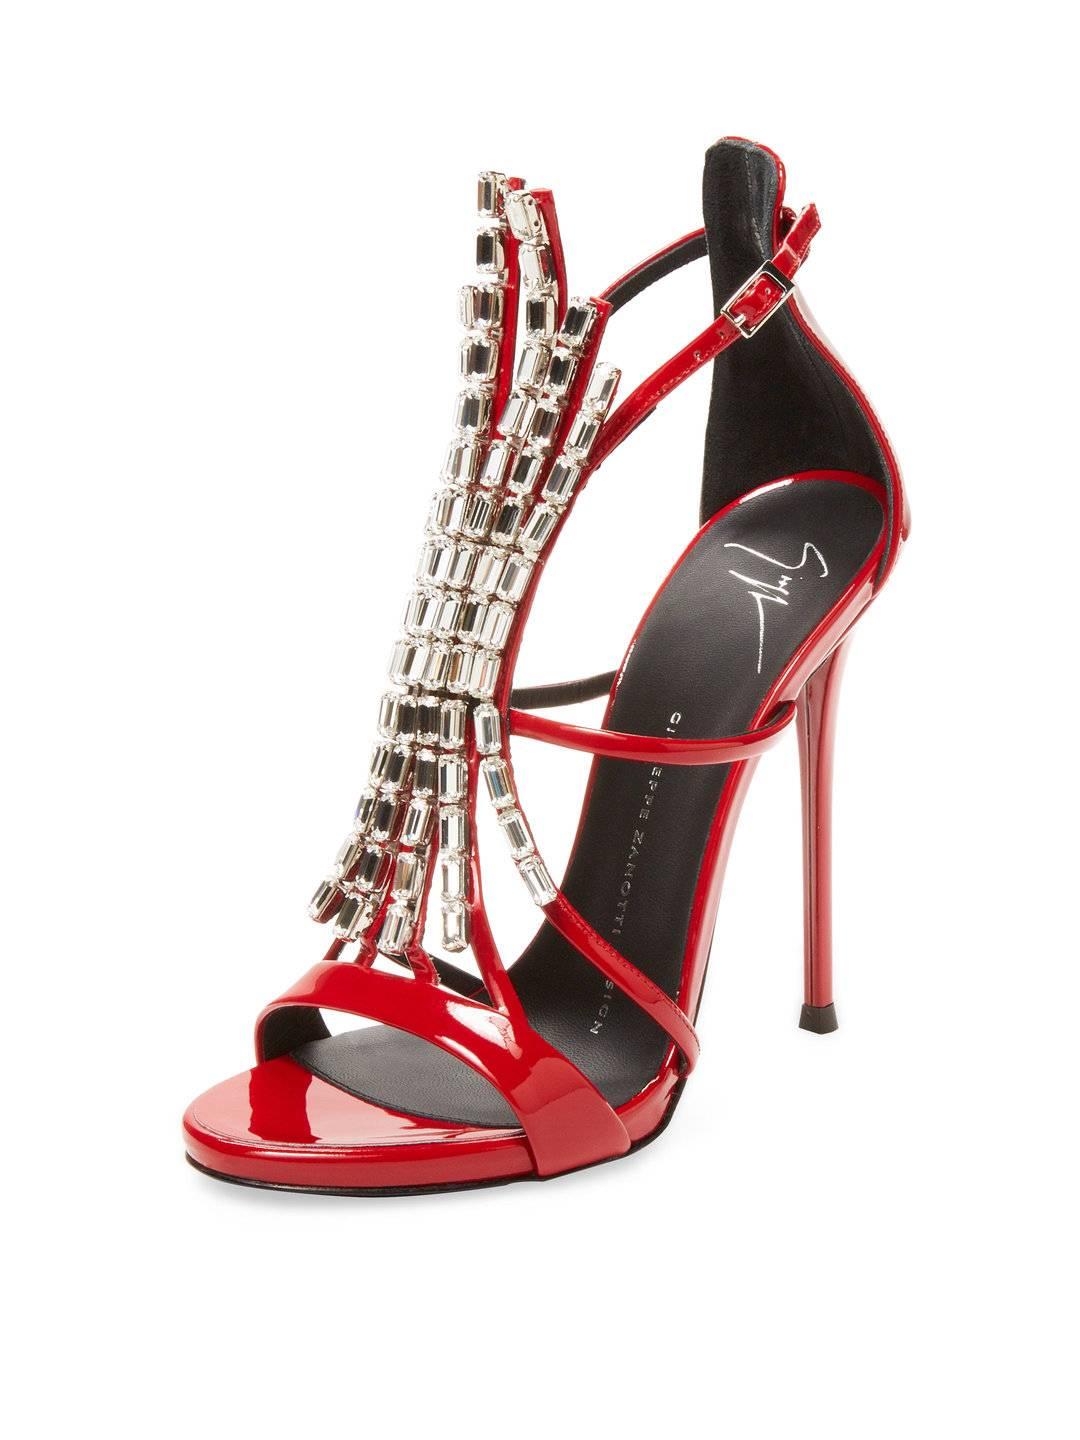 Women's Giuseppe Zanotti NEW & SOLD OUT Red Patent Jewel Evening Sandals Heels in Box